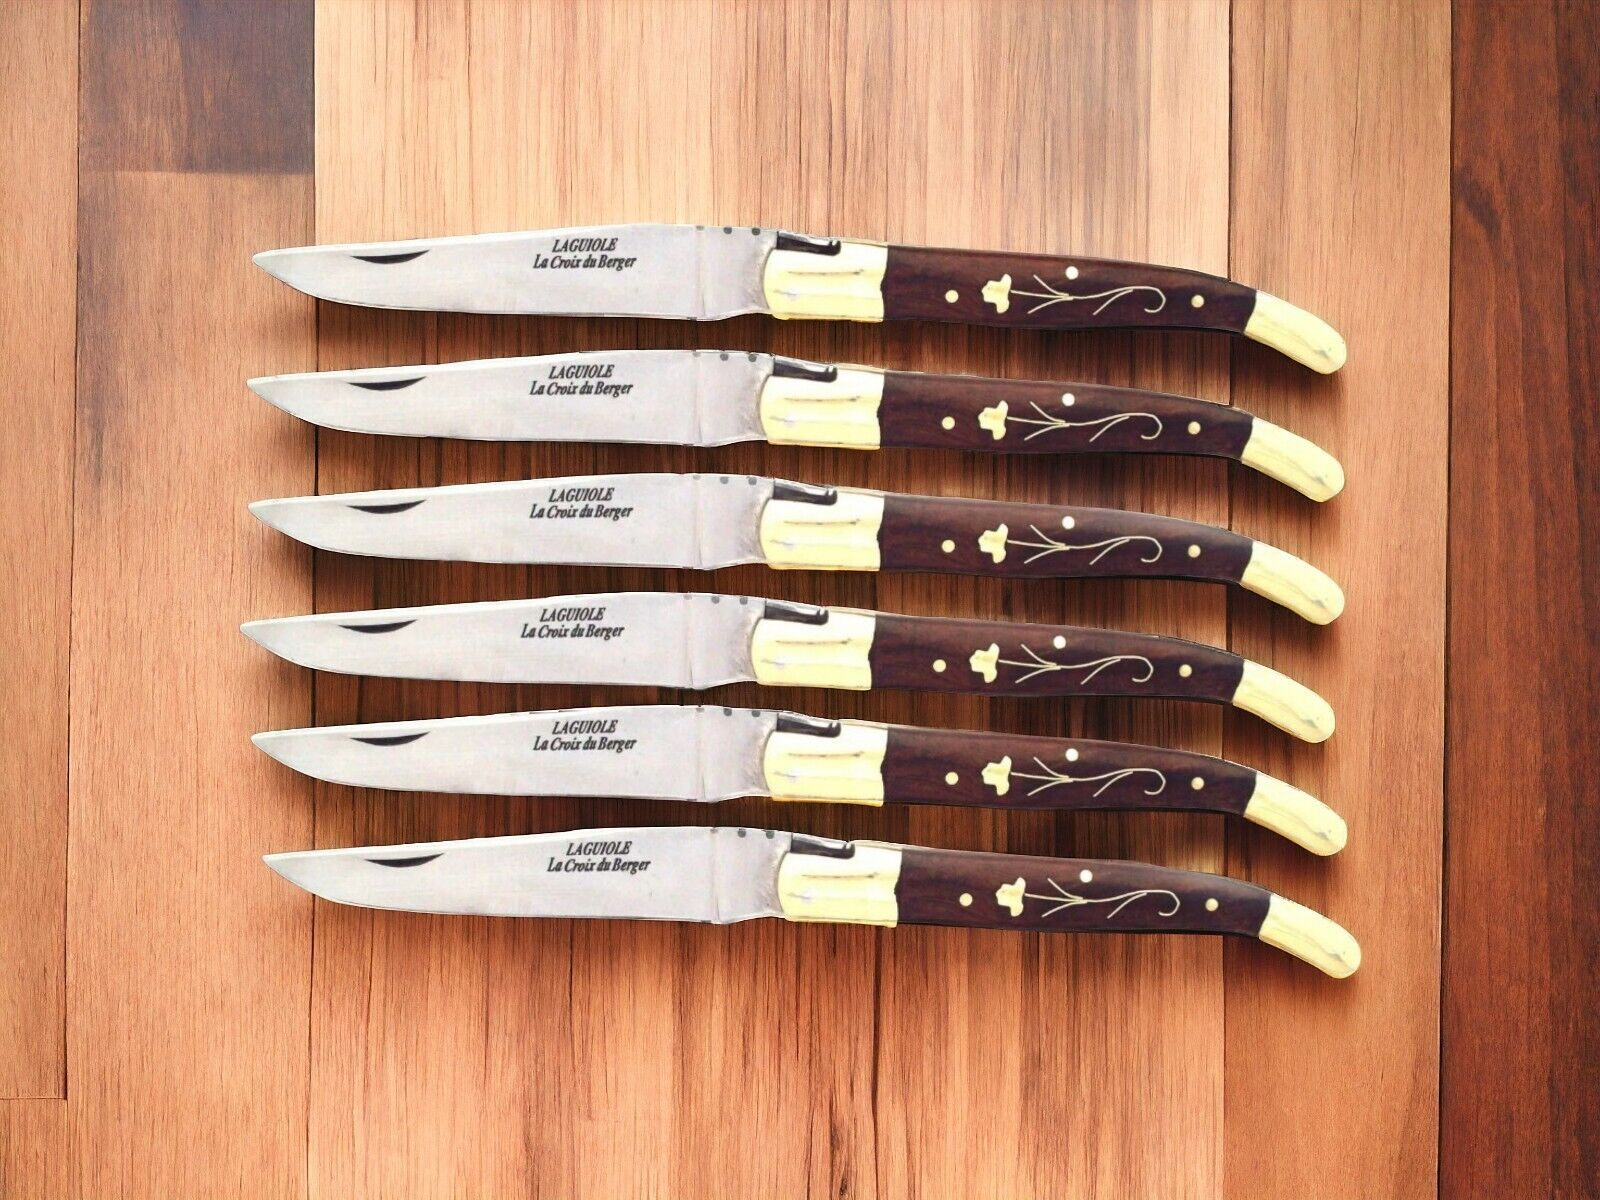 FRENCH LAGUIOLE STAINLESS STEEL 12C27 FOLDING HUNTING KNIFE 6 PC SET WOOD HANDLE